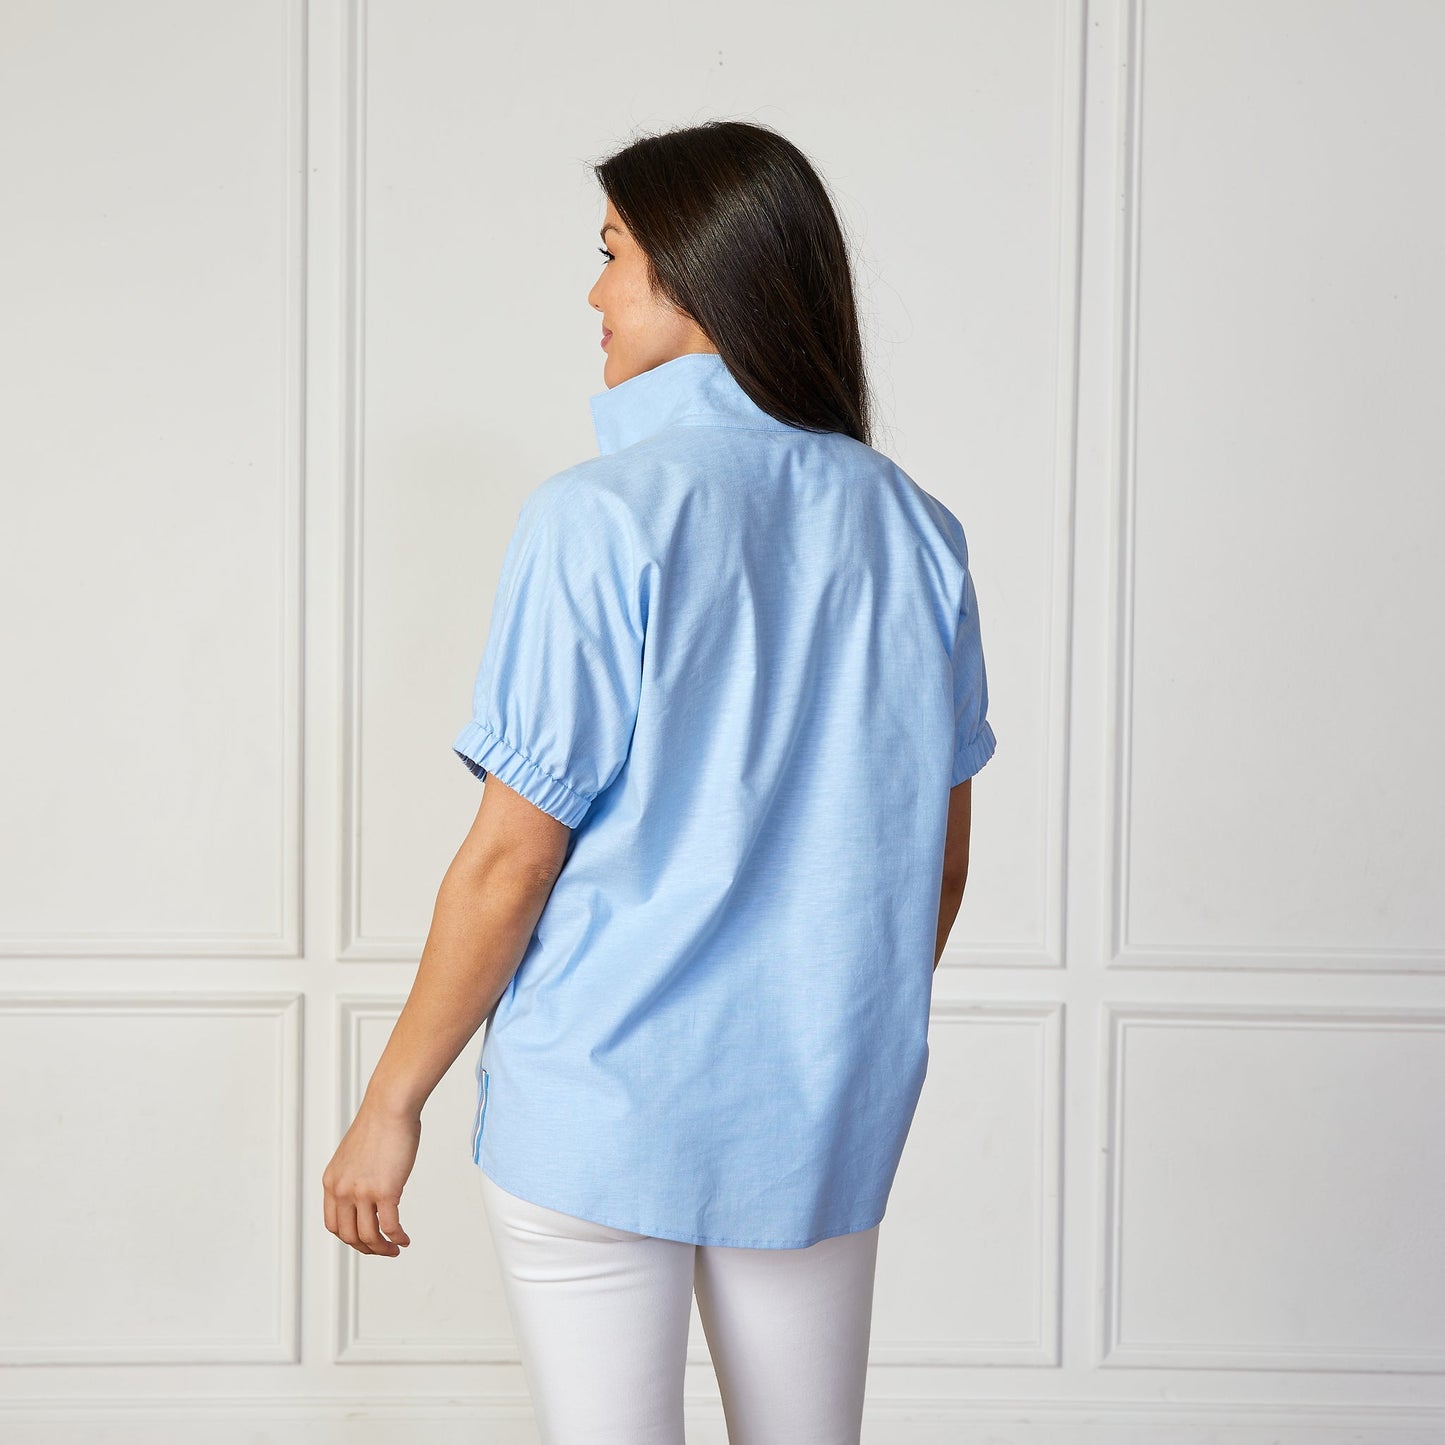 Caryn Lawn | Betsy Collared Top | Chambray Blue